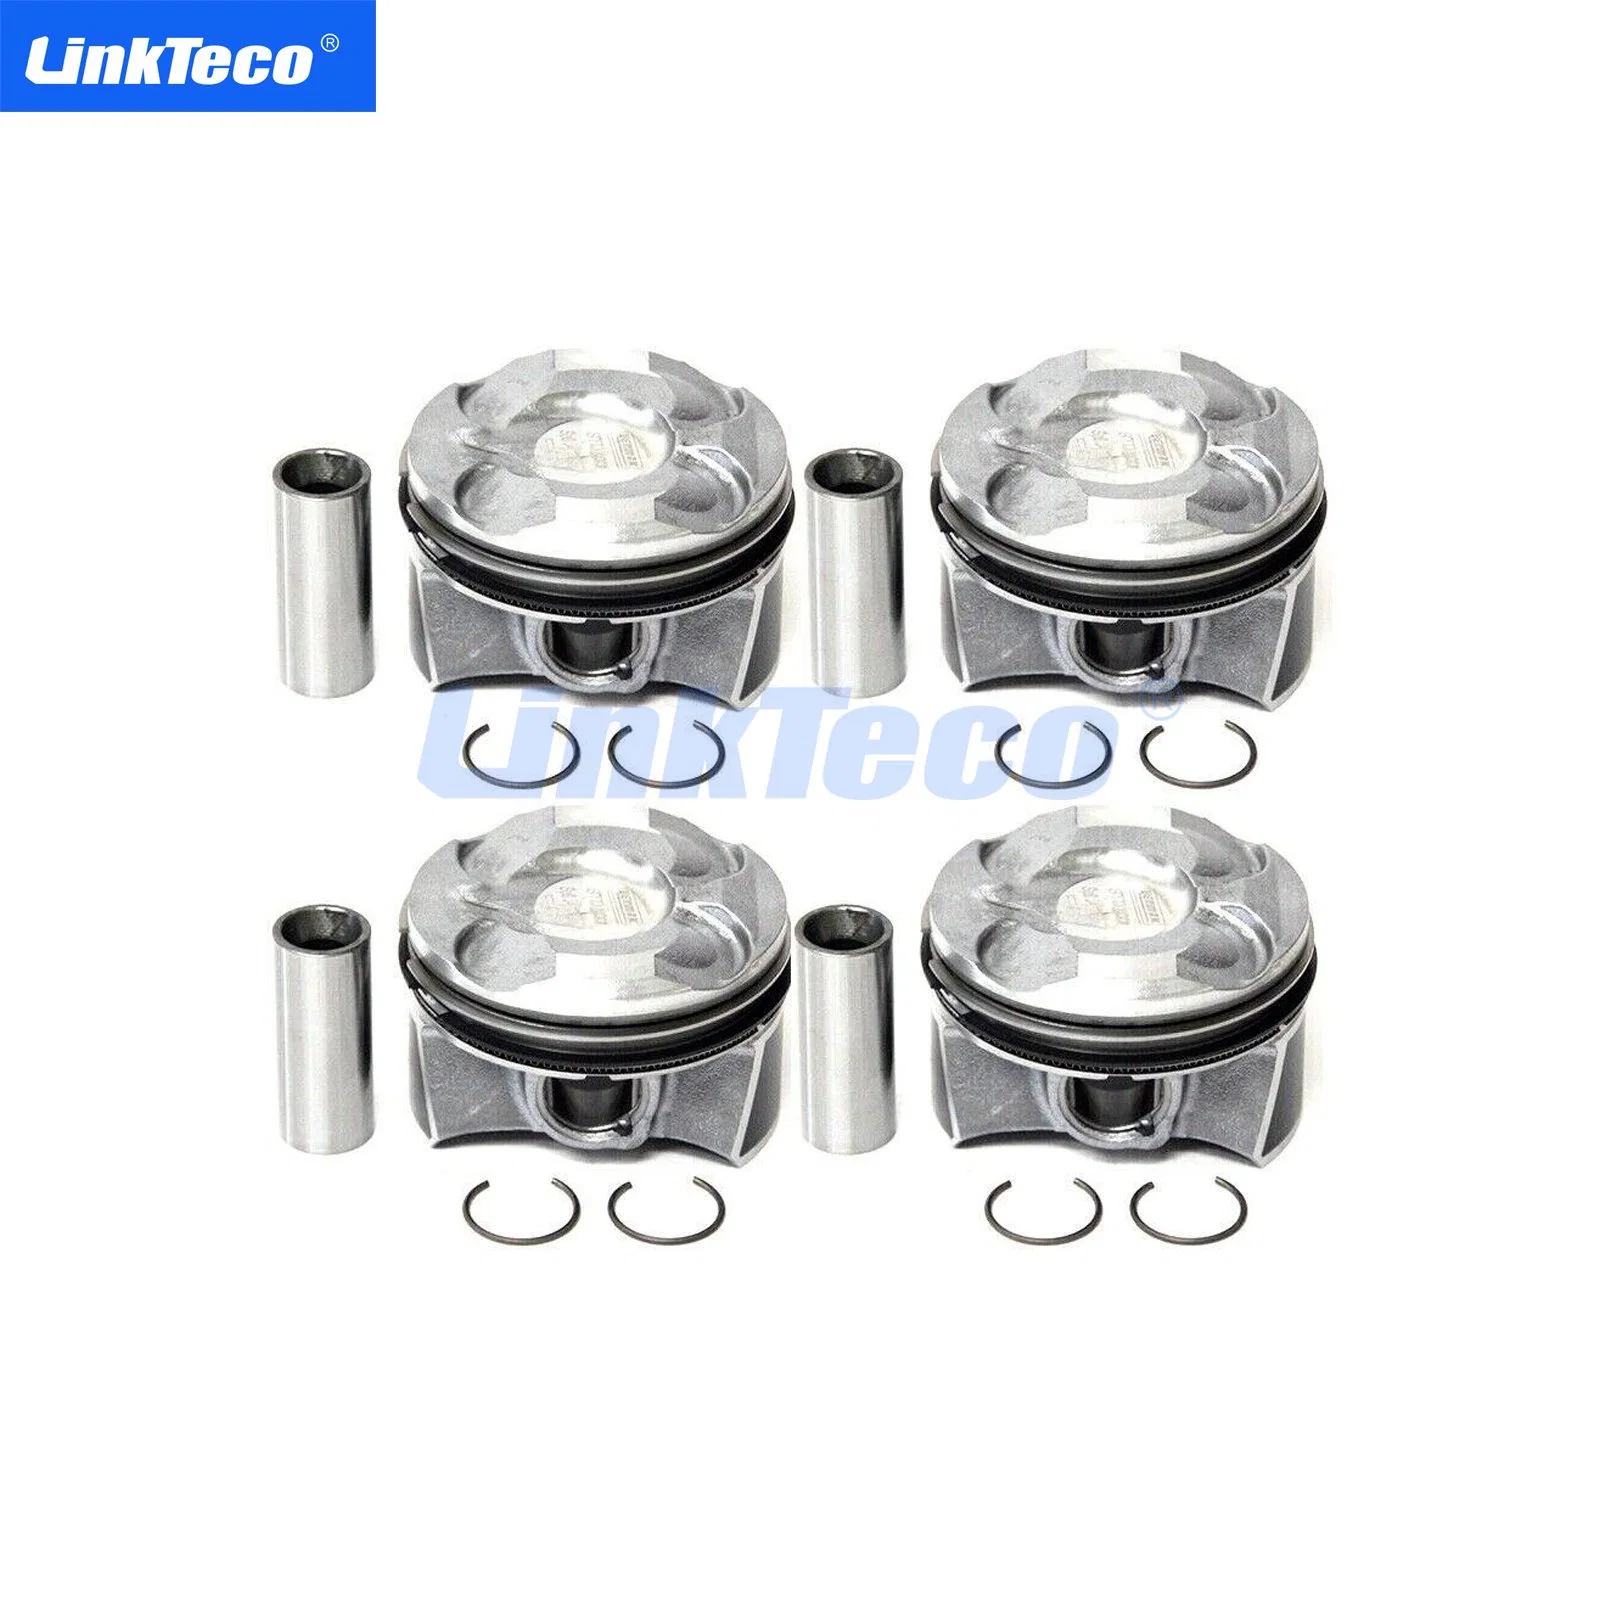 4X 77.50mm Engine Pistons Rings Set Fit for BMW 116I 120I Mini 1.6t 11257601181